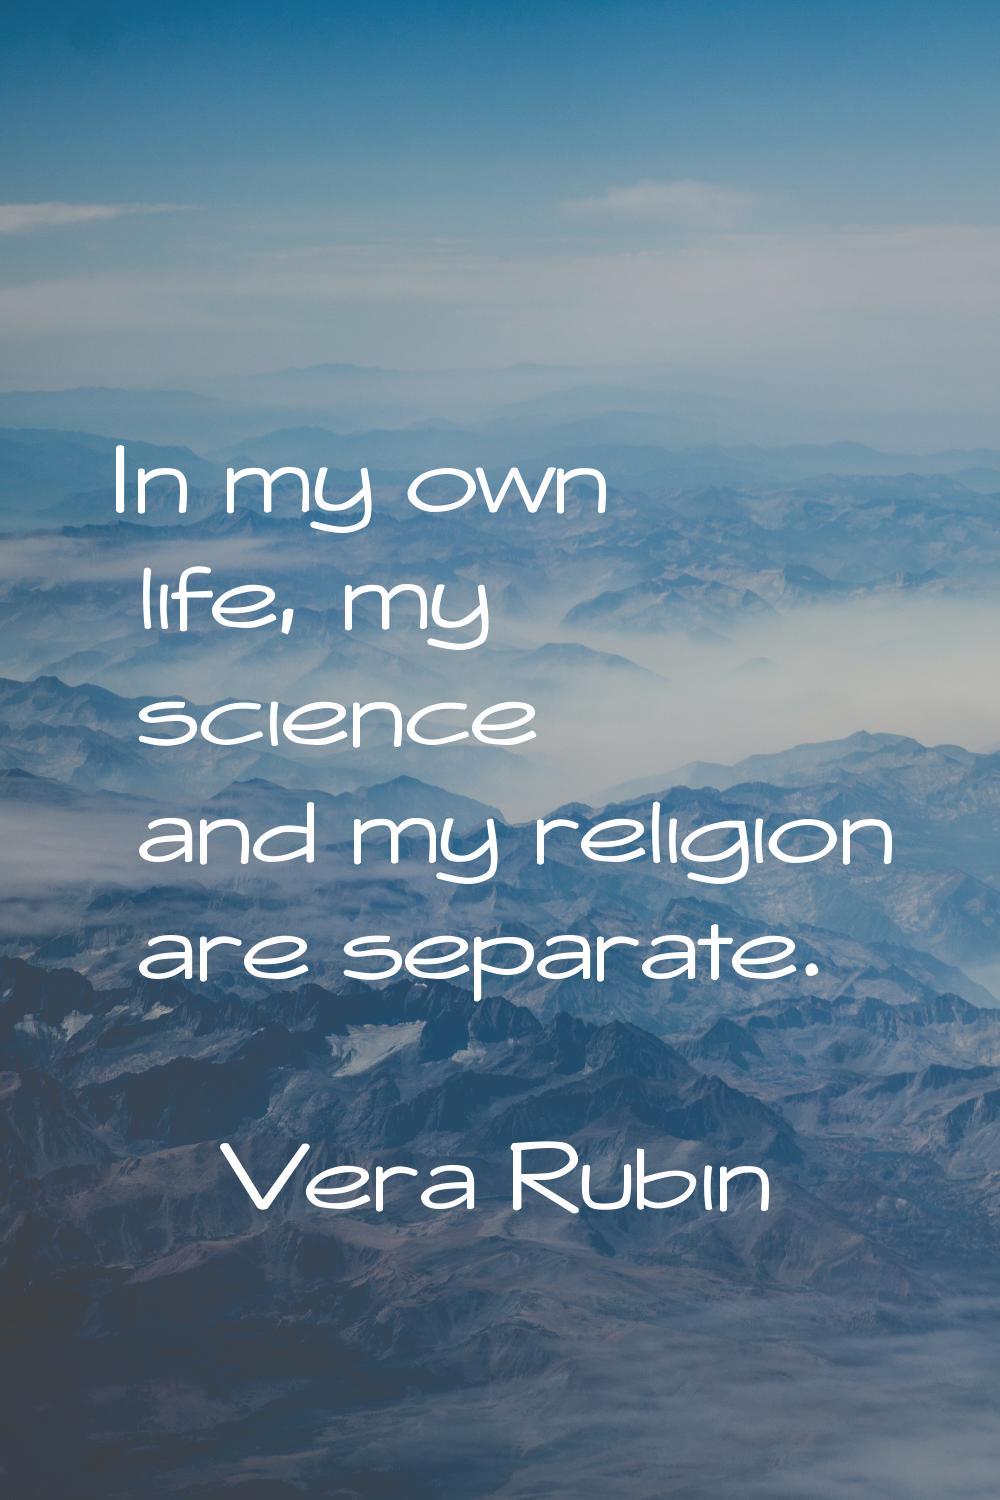 In my own life, my science and my religion are separate.